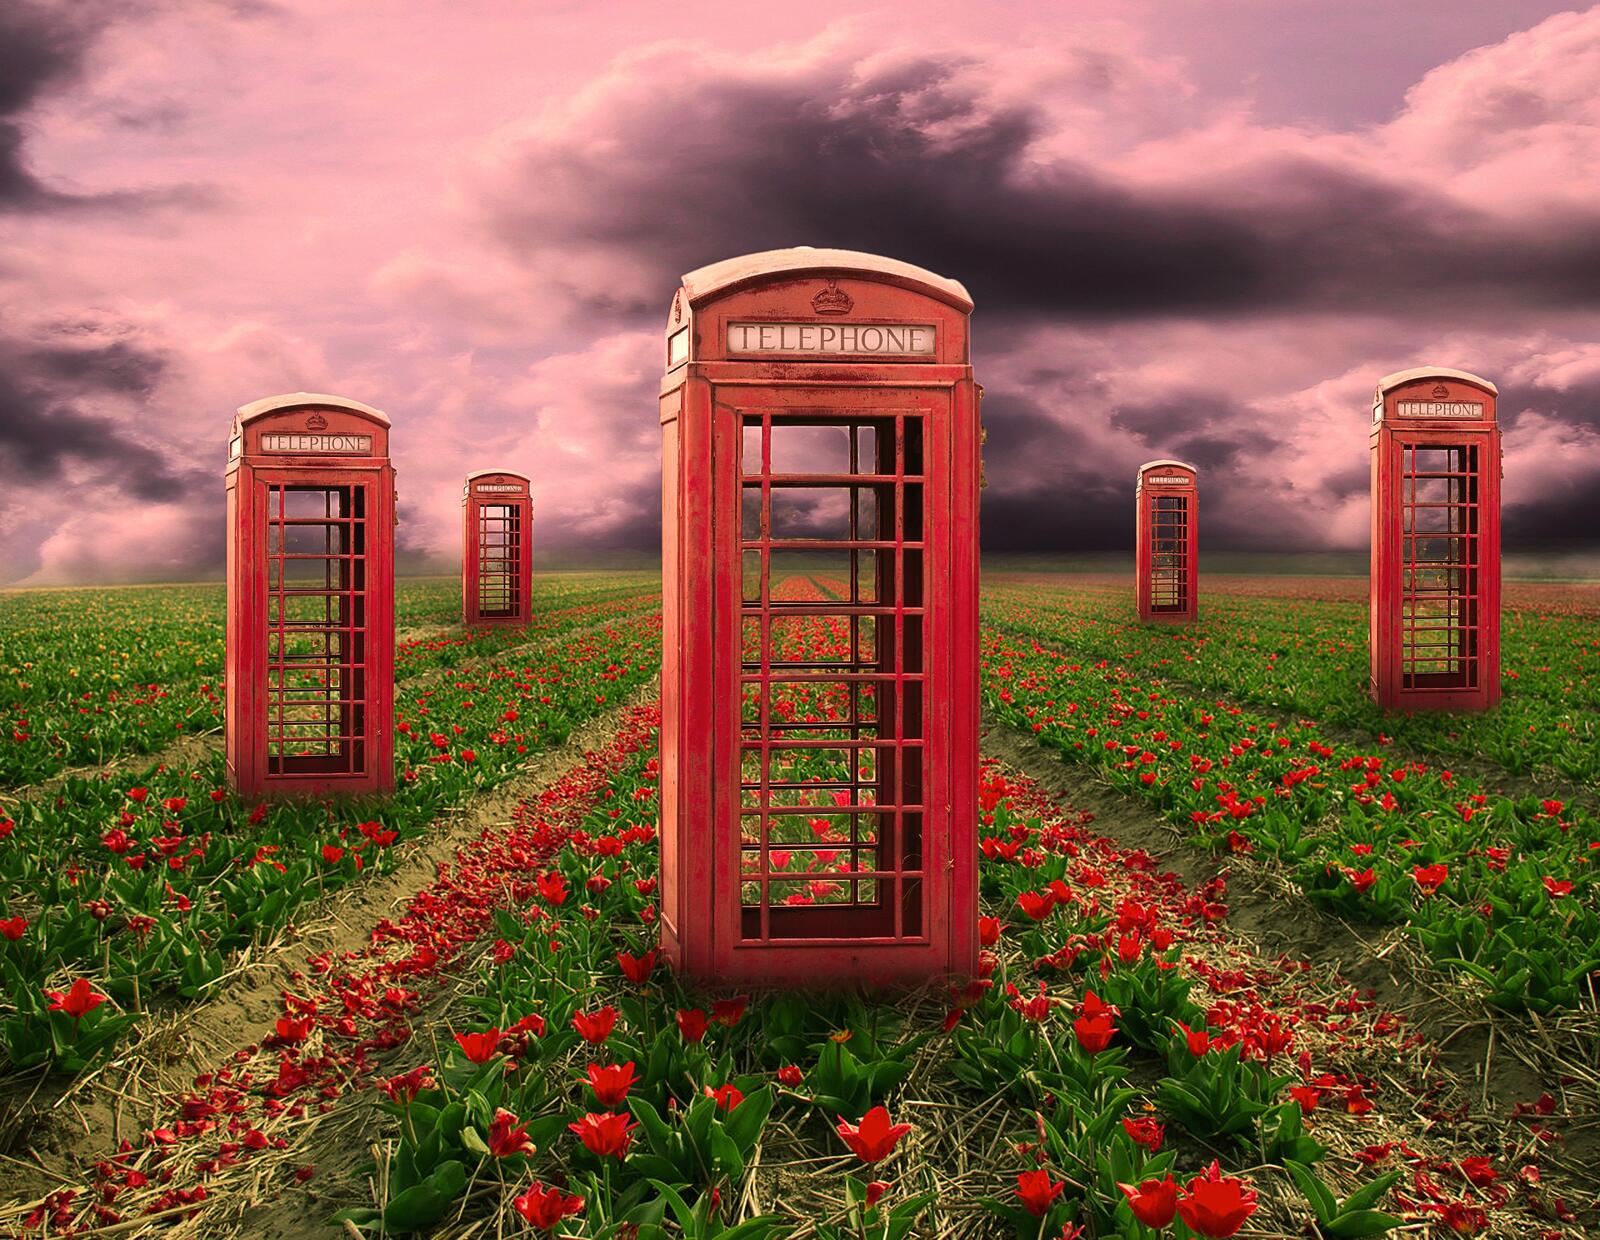 Wallpapers telephone booth field art on the desktop